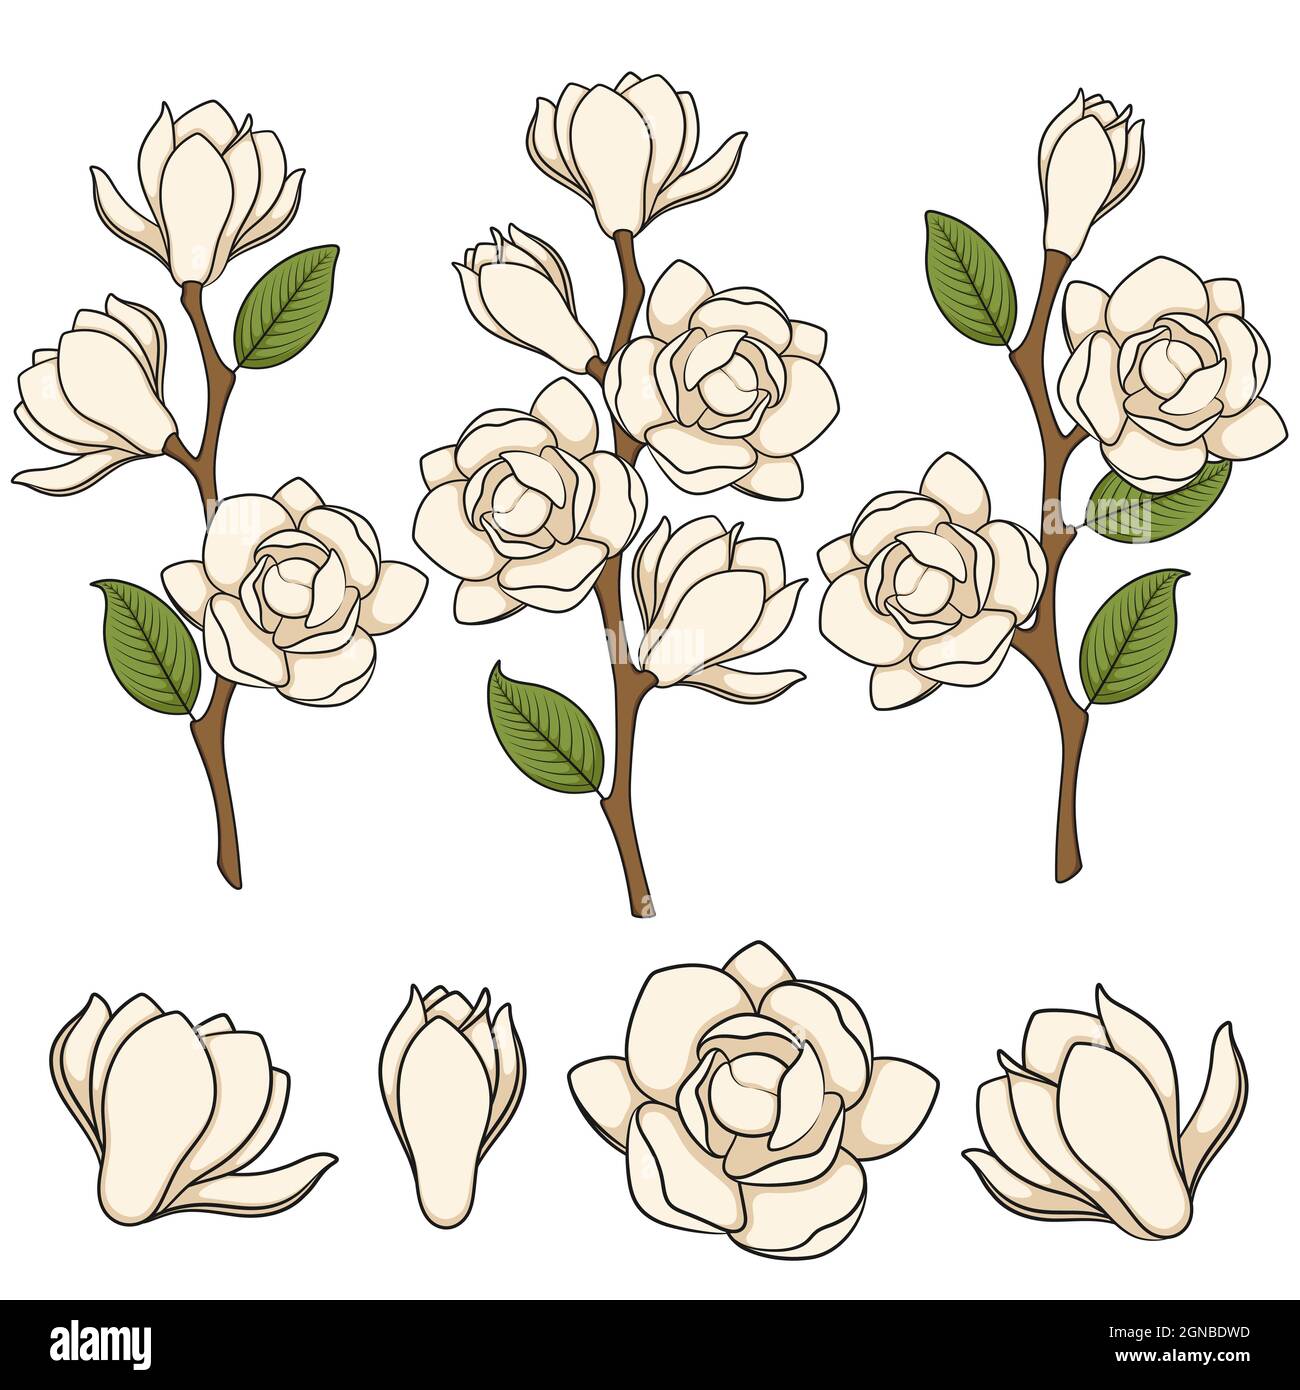 Set of colored illustration of flowering white magnolia branches. Isolated vector objects on white background. Stock Vector